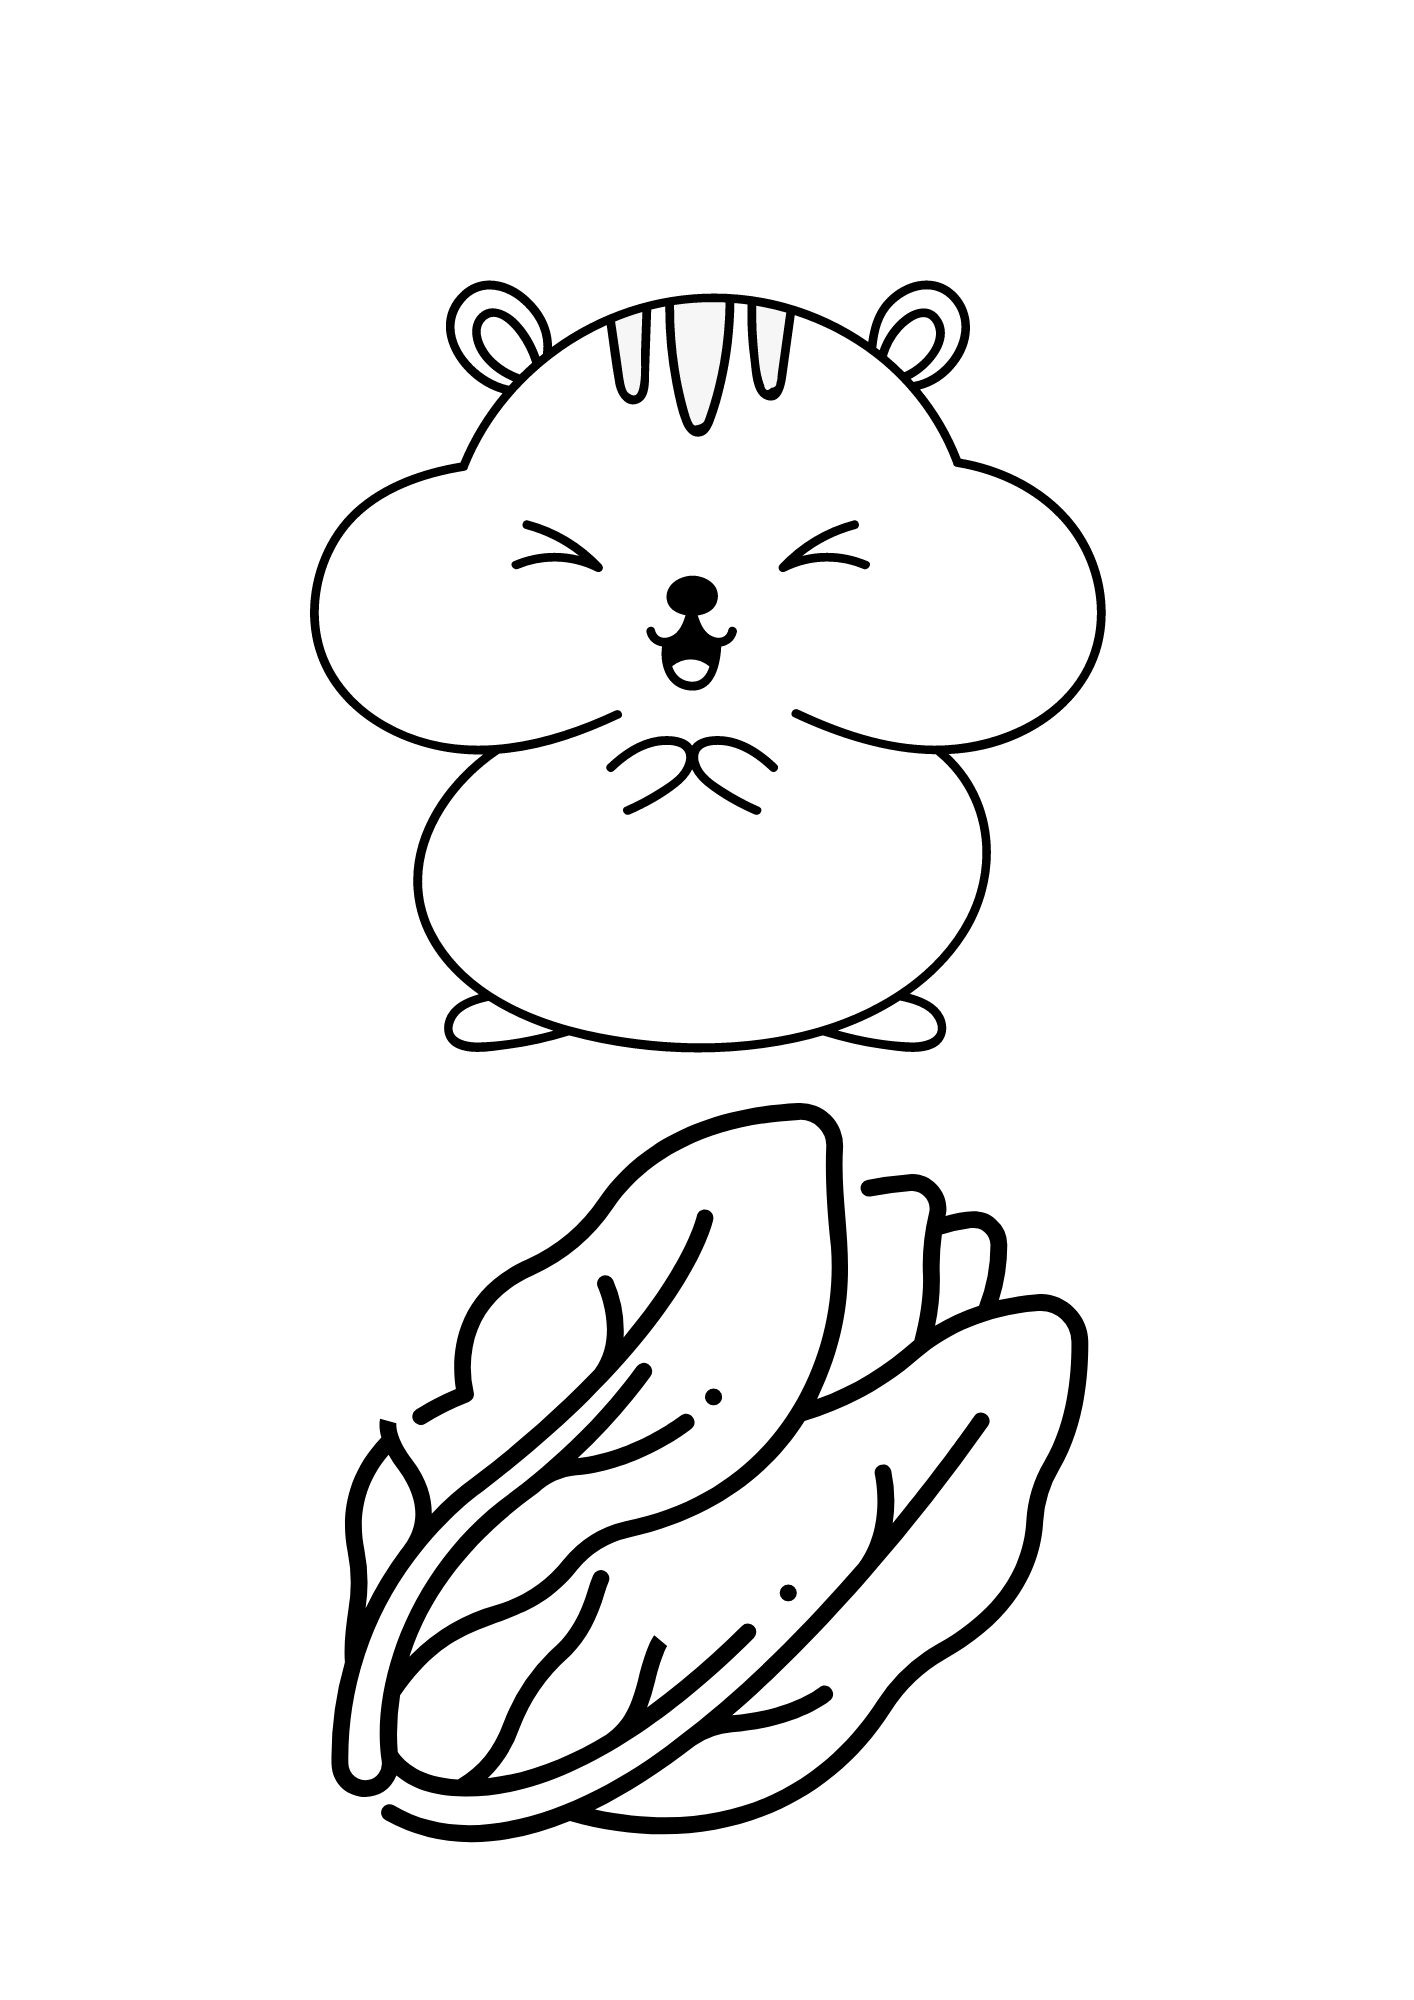 hamster with salad leaves coloring page